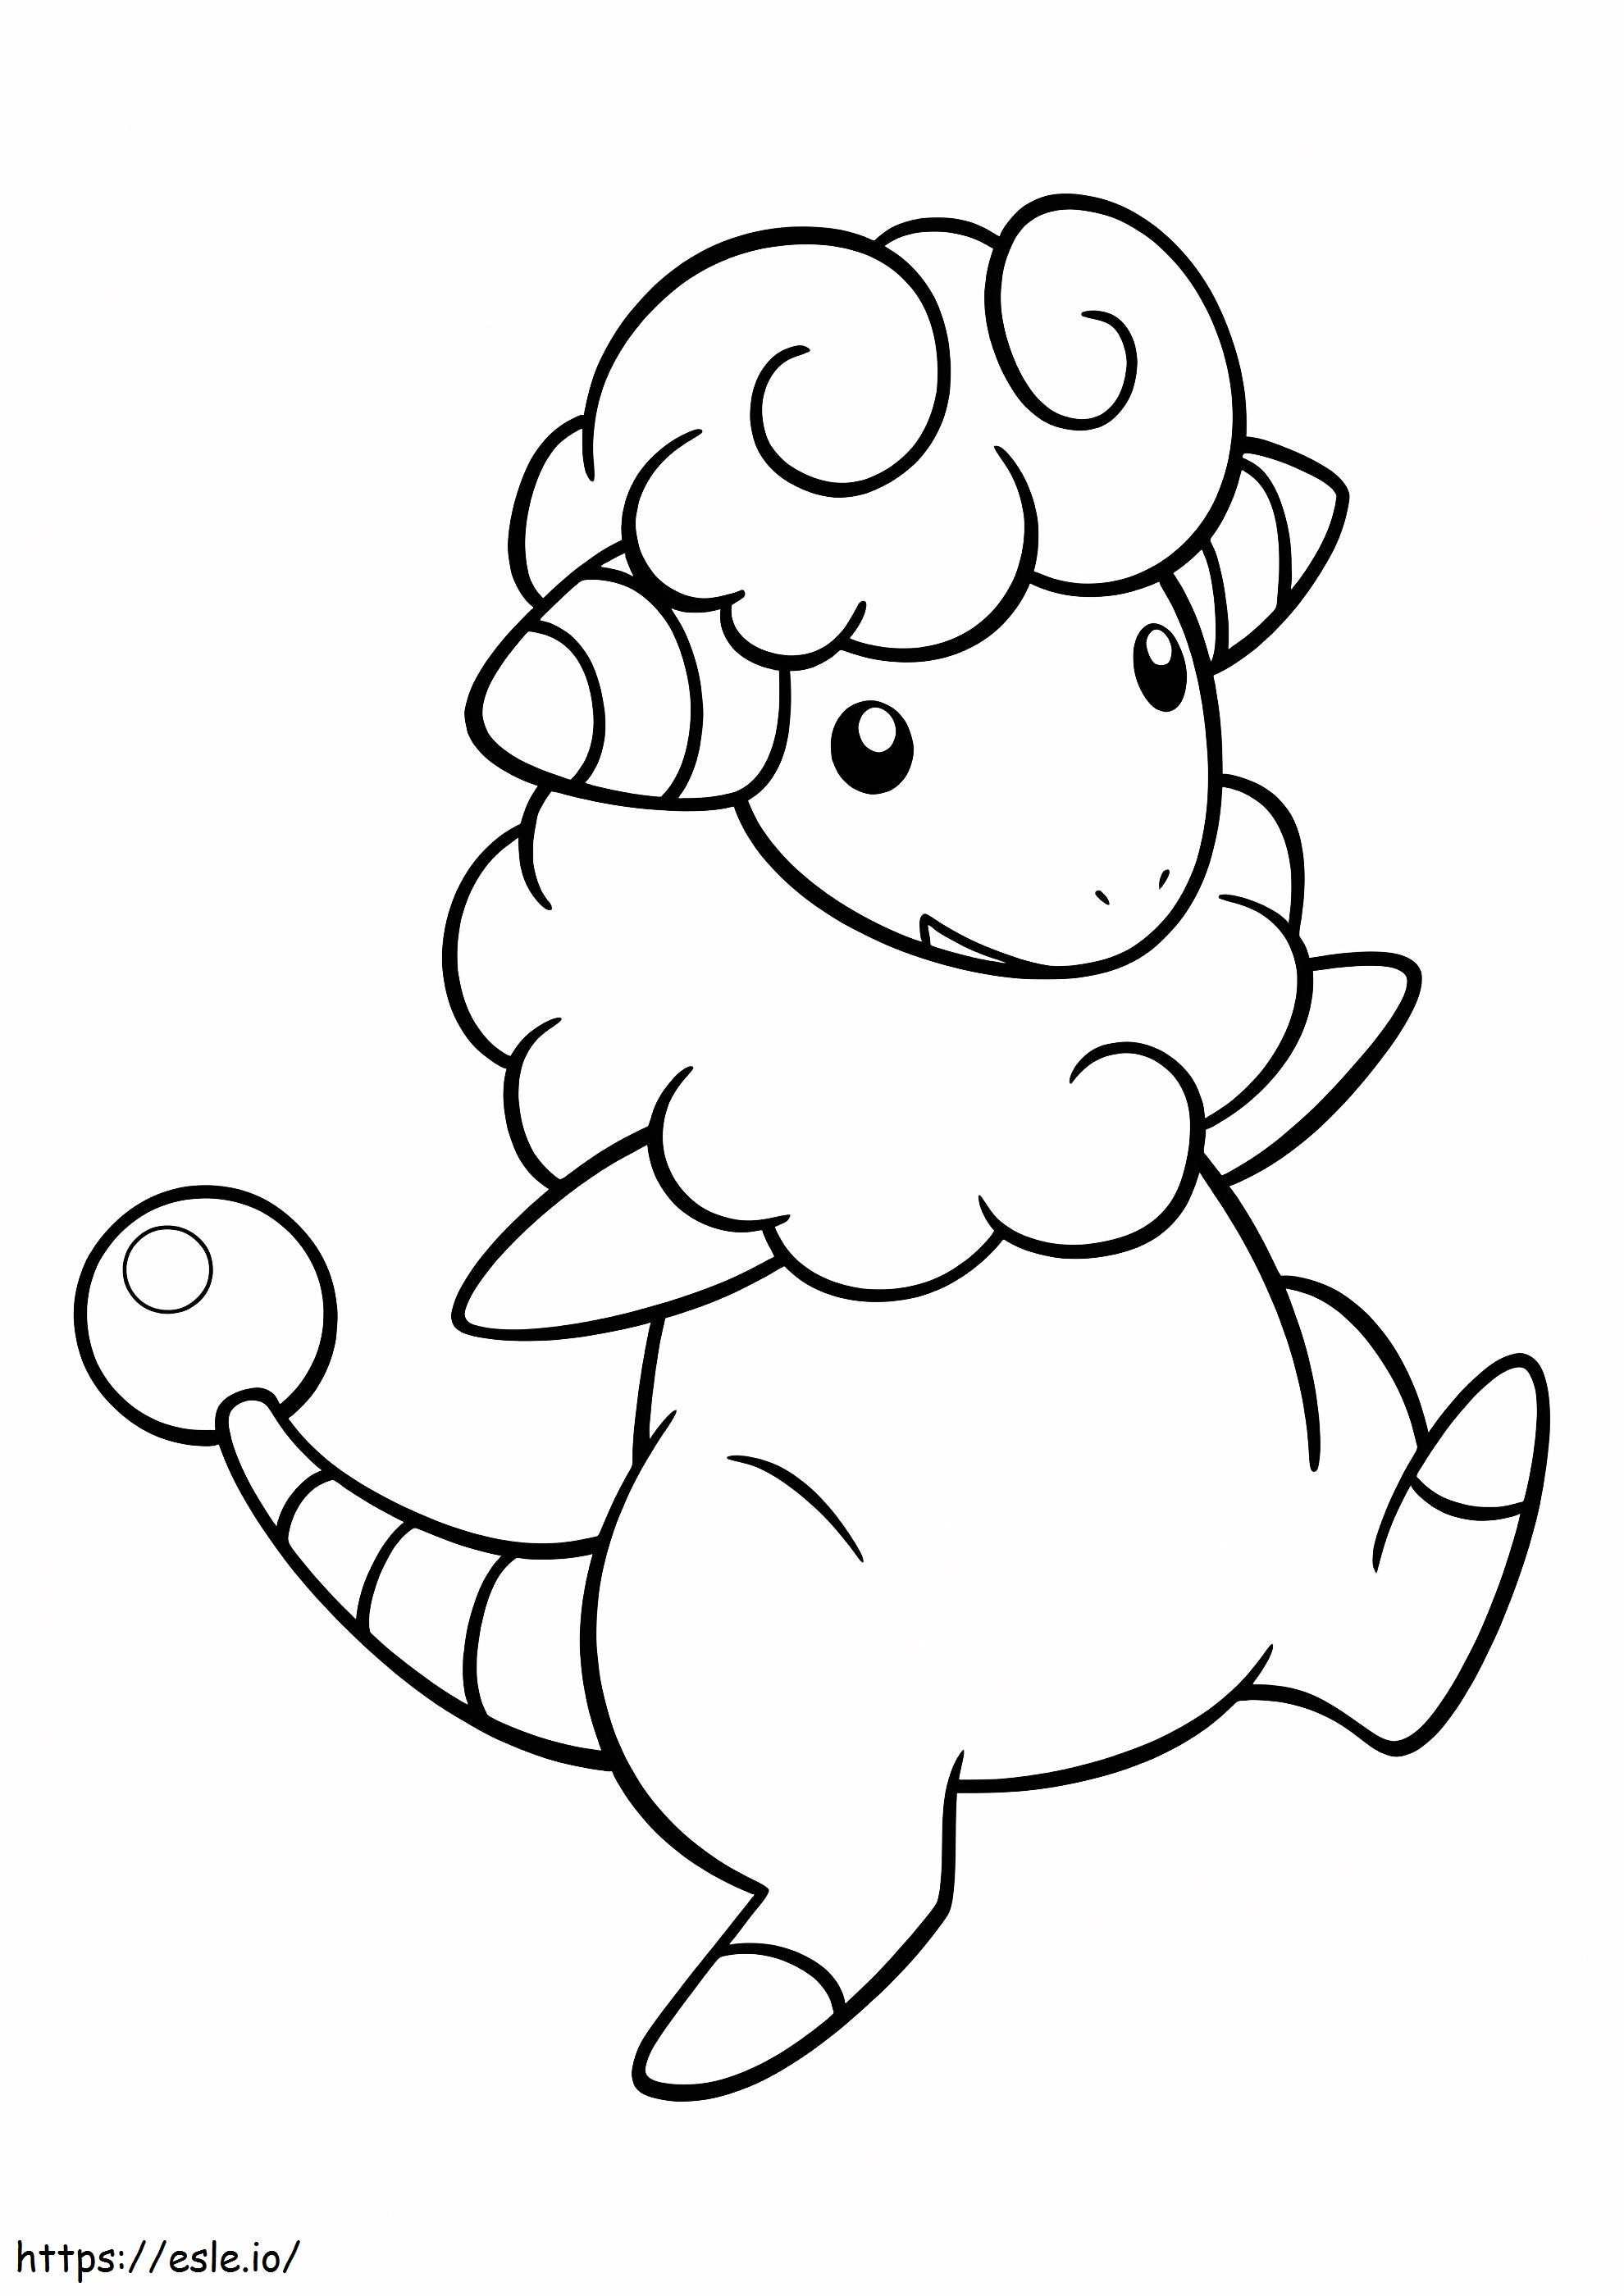 Adorable Flaaffy Pokemon coloring page